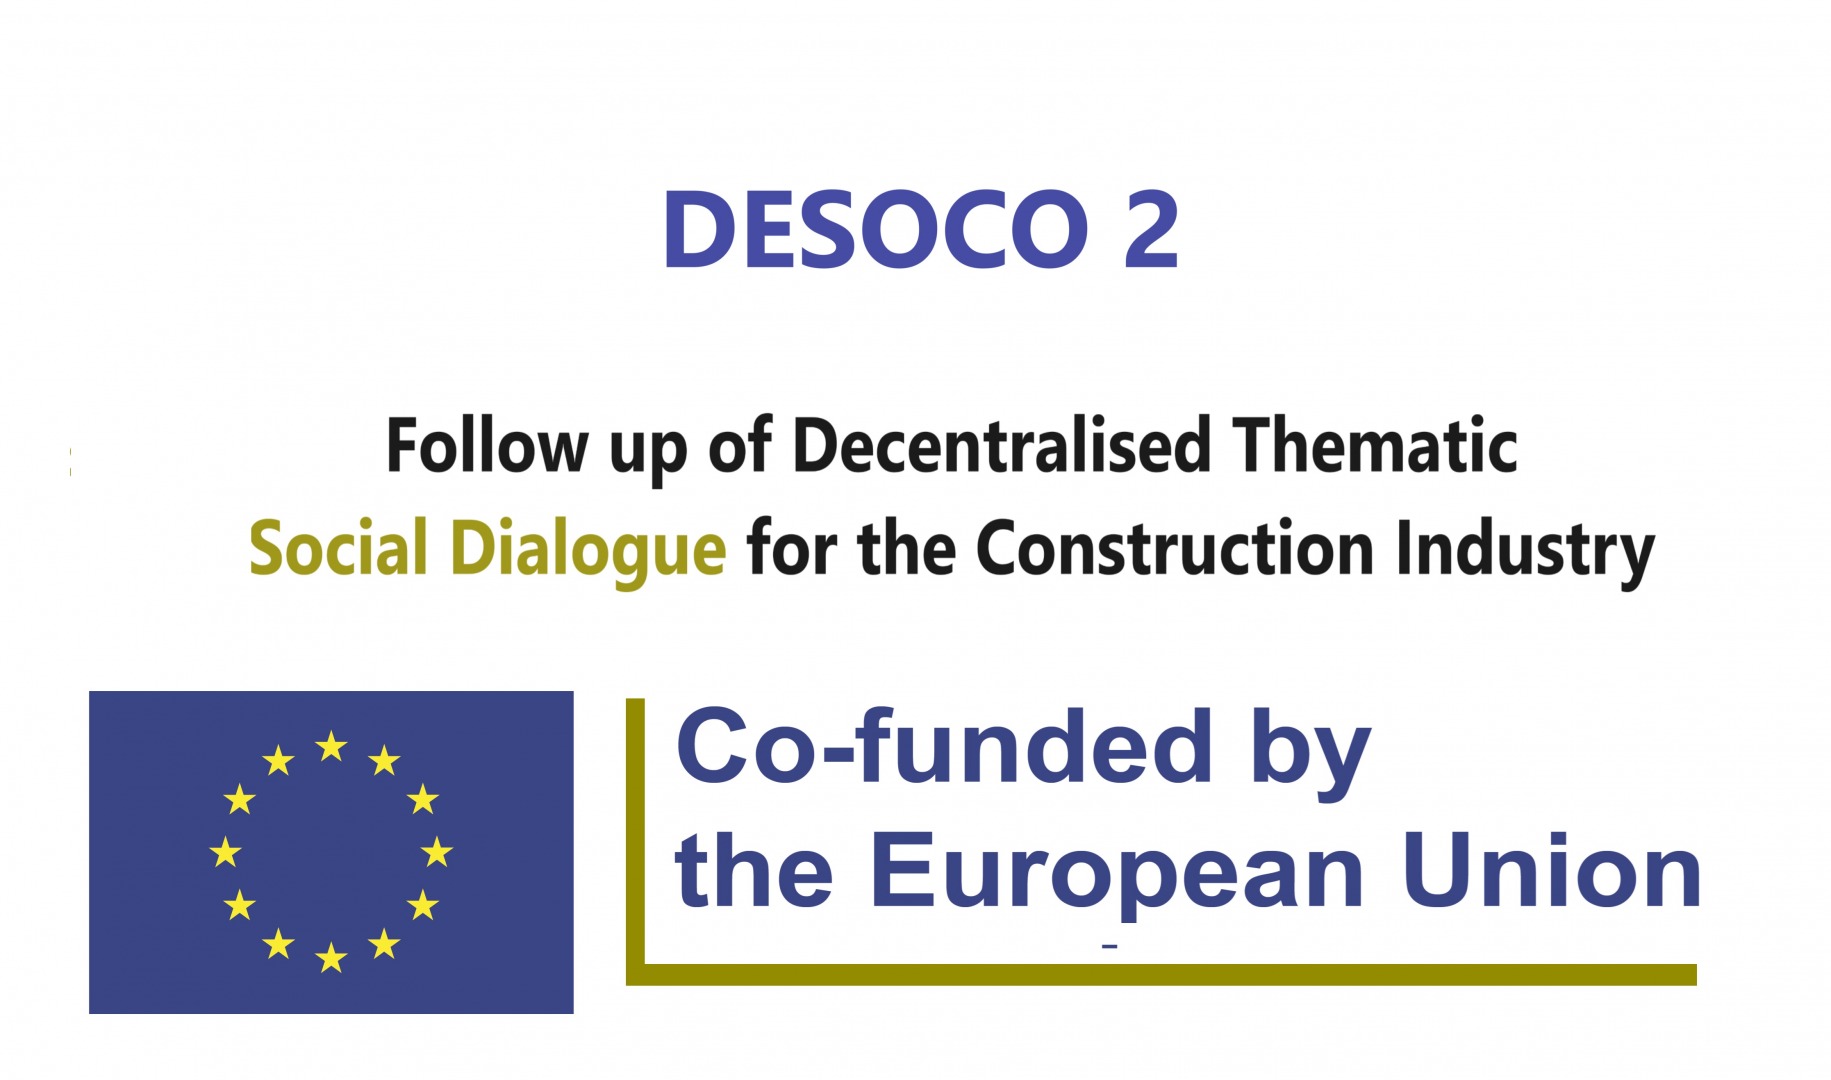 DESOCO2 - Follow up of Decentralised Thematic Social Dialogue for the Construction Industry – Social Dialogue Project